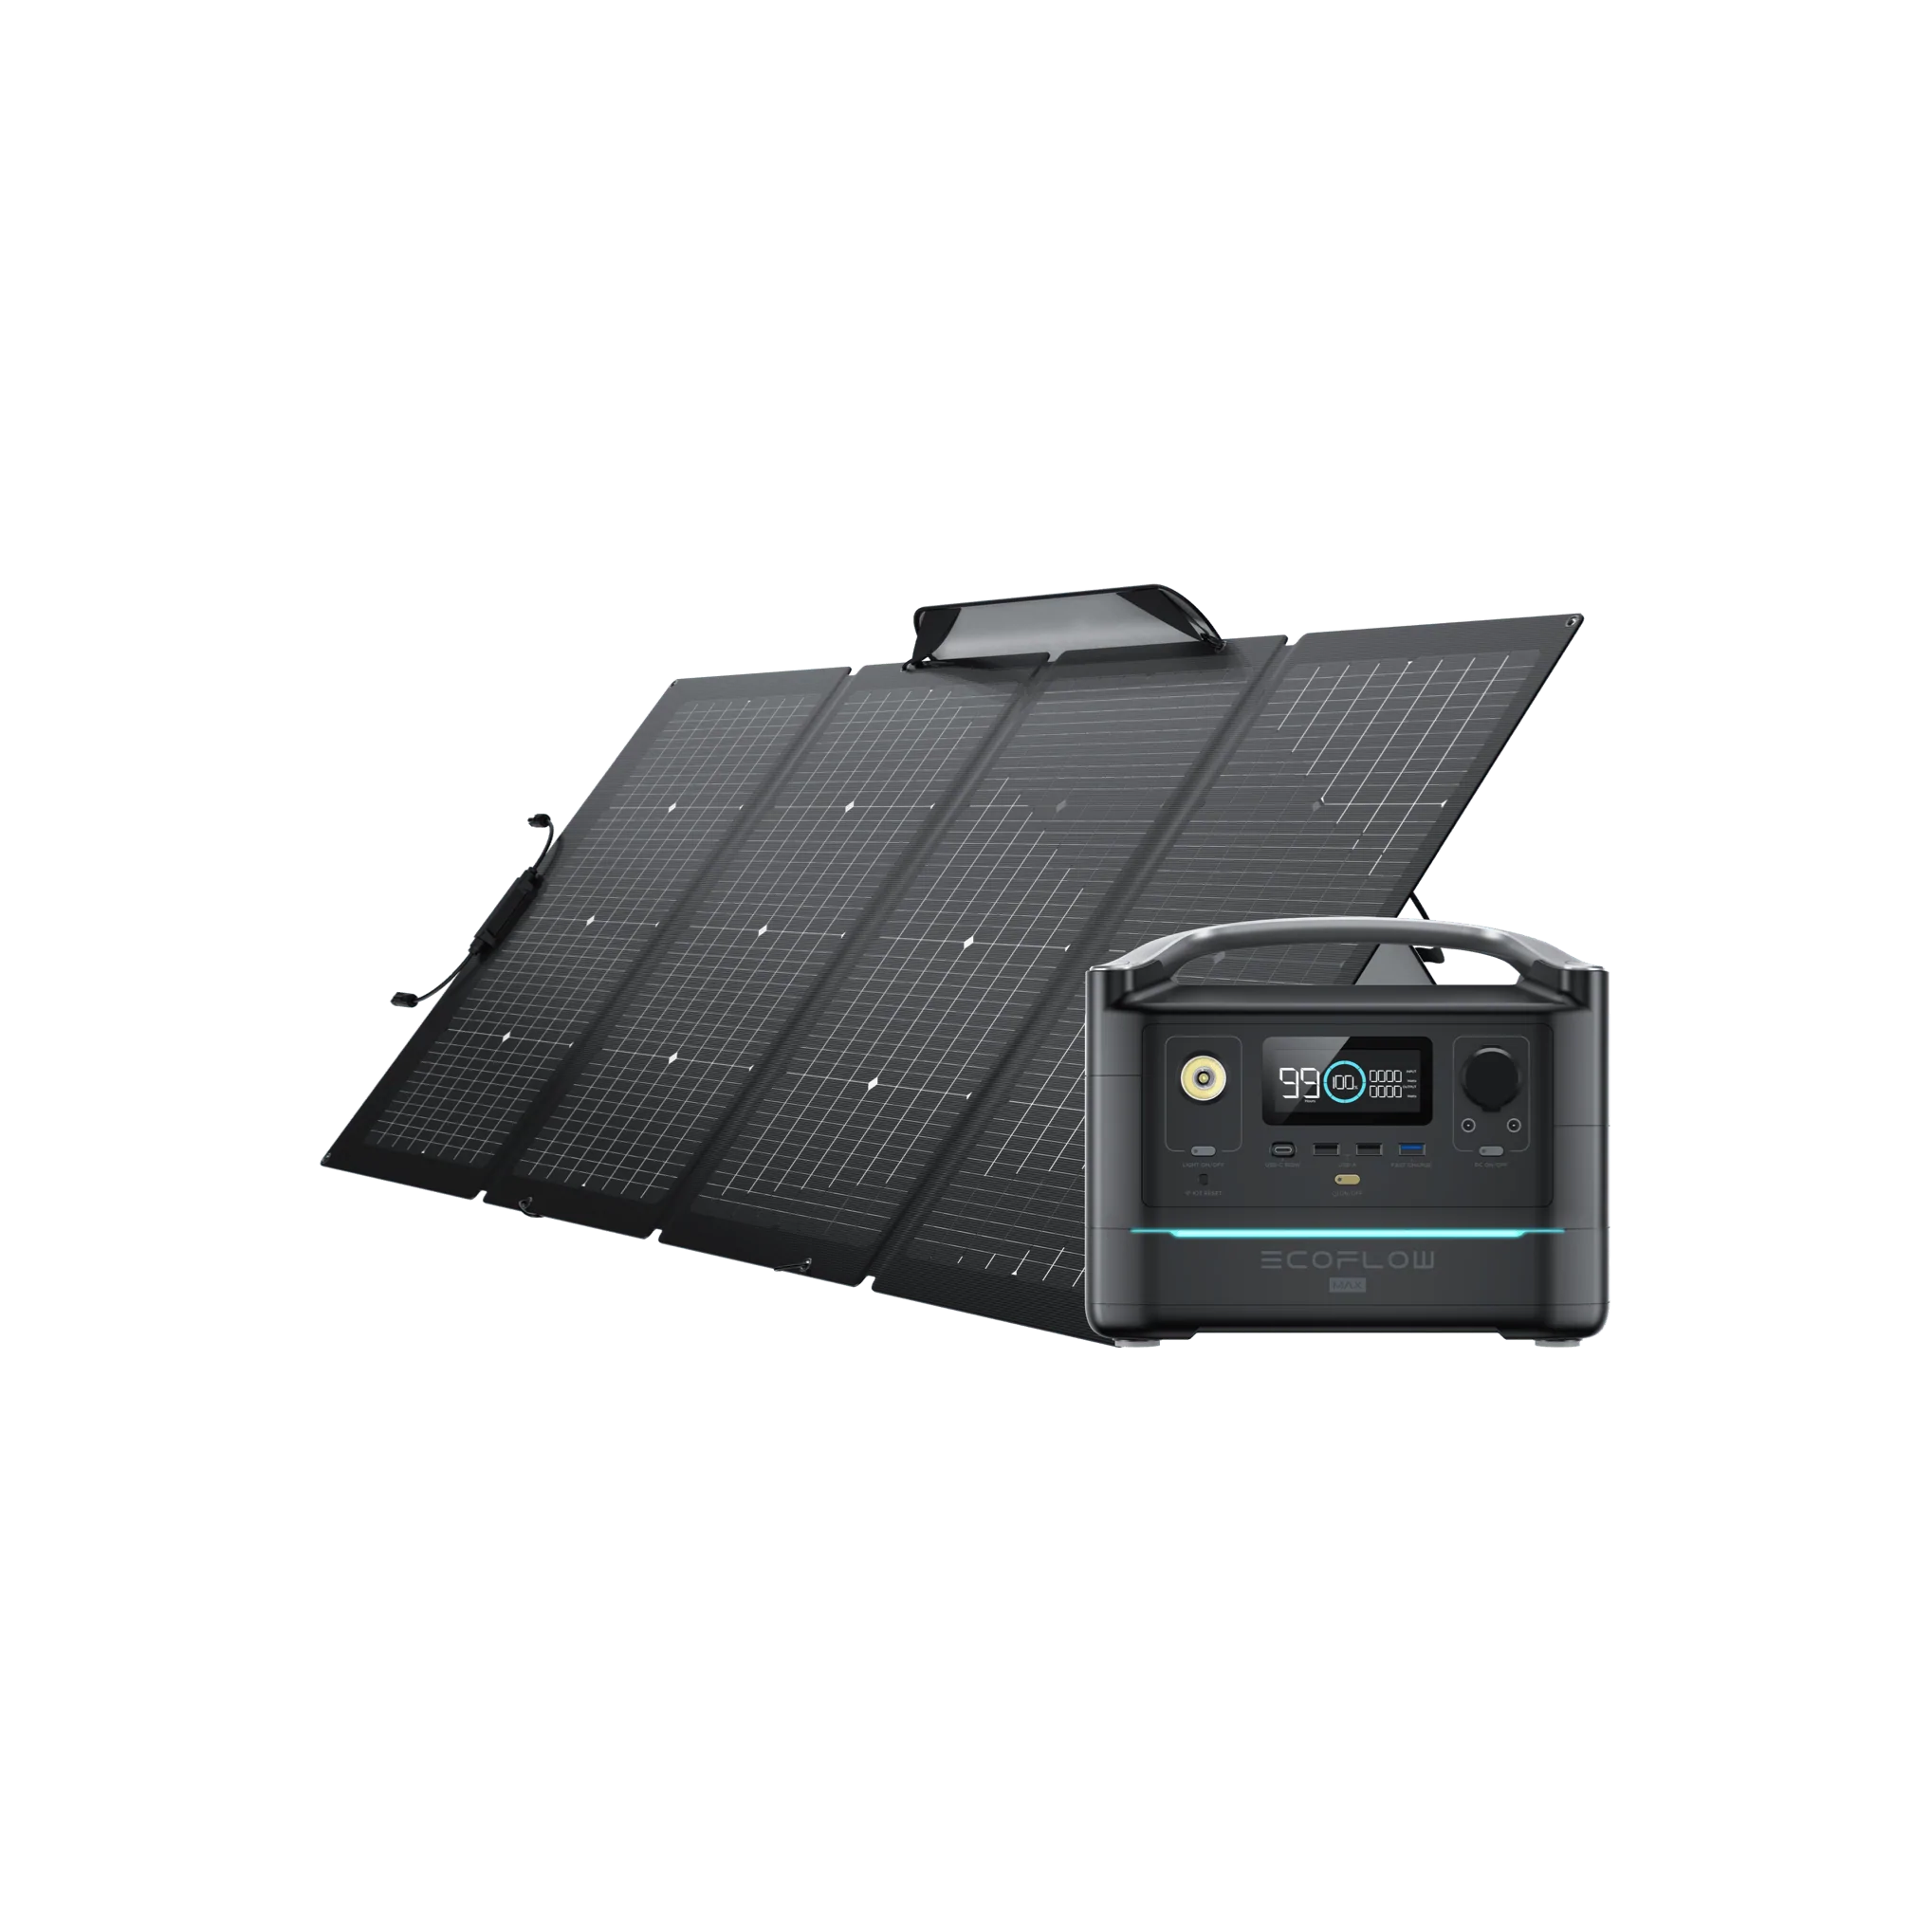 A solar generator with a portable solar panel, battery, and charger.